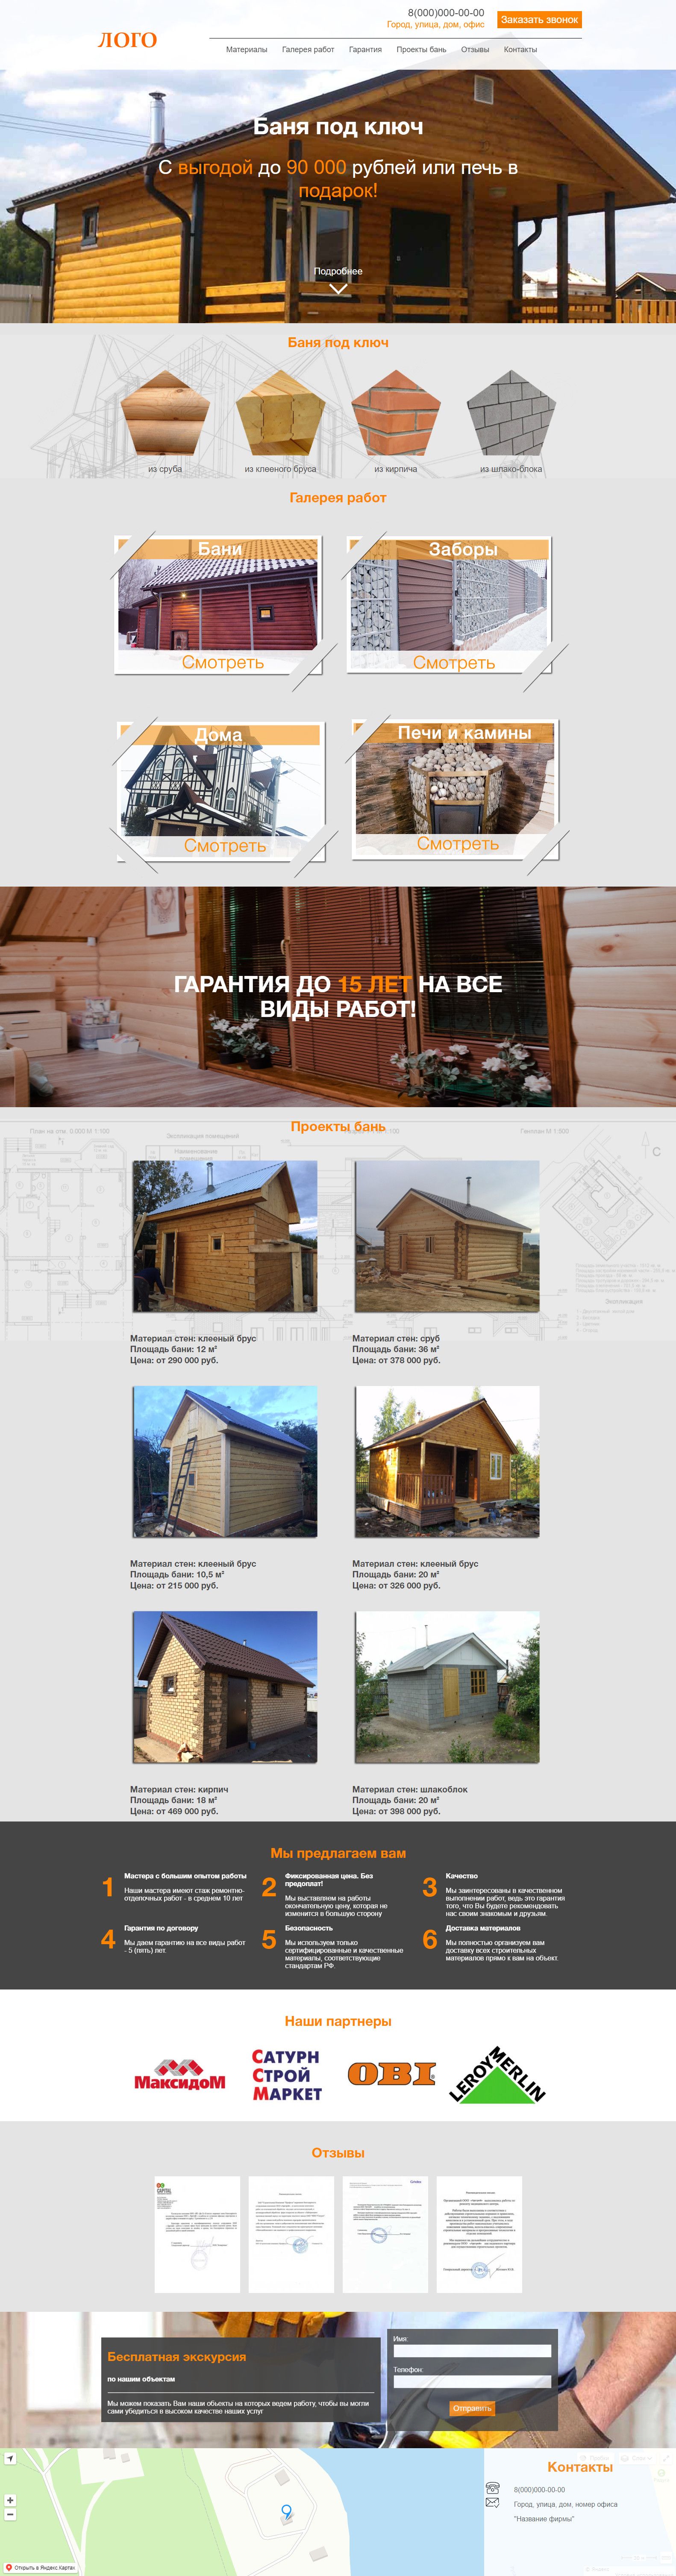 Landing page - Turnkey construction of baths